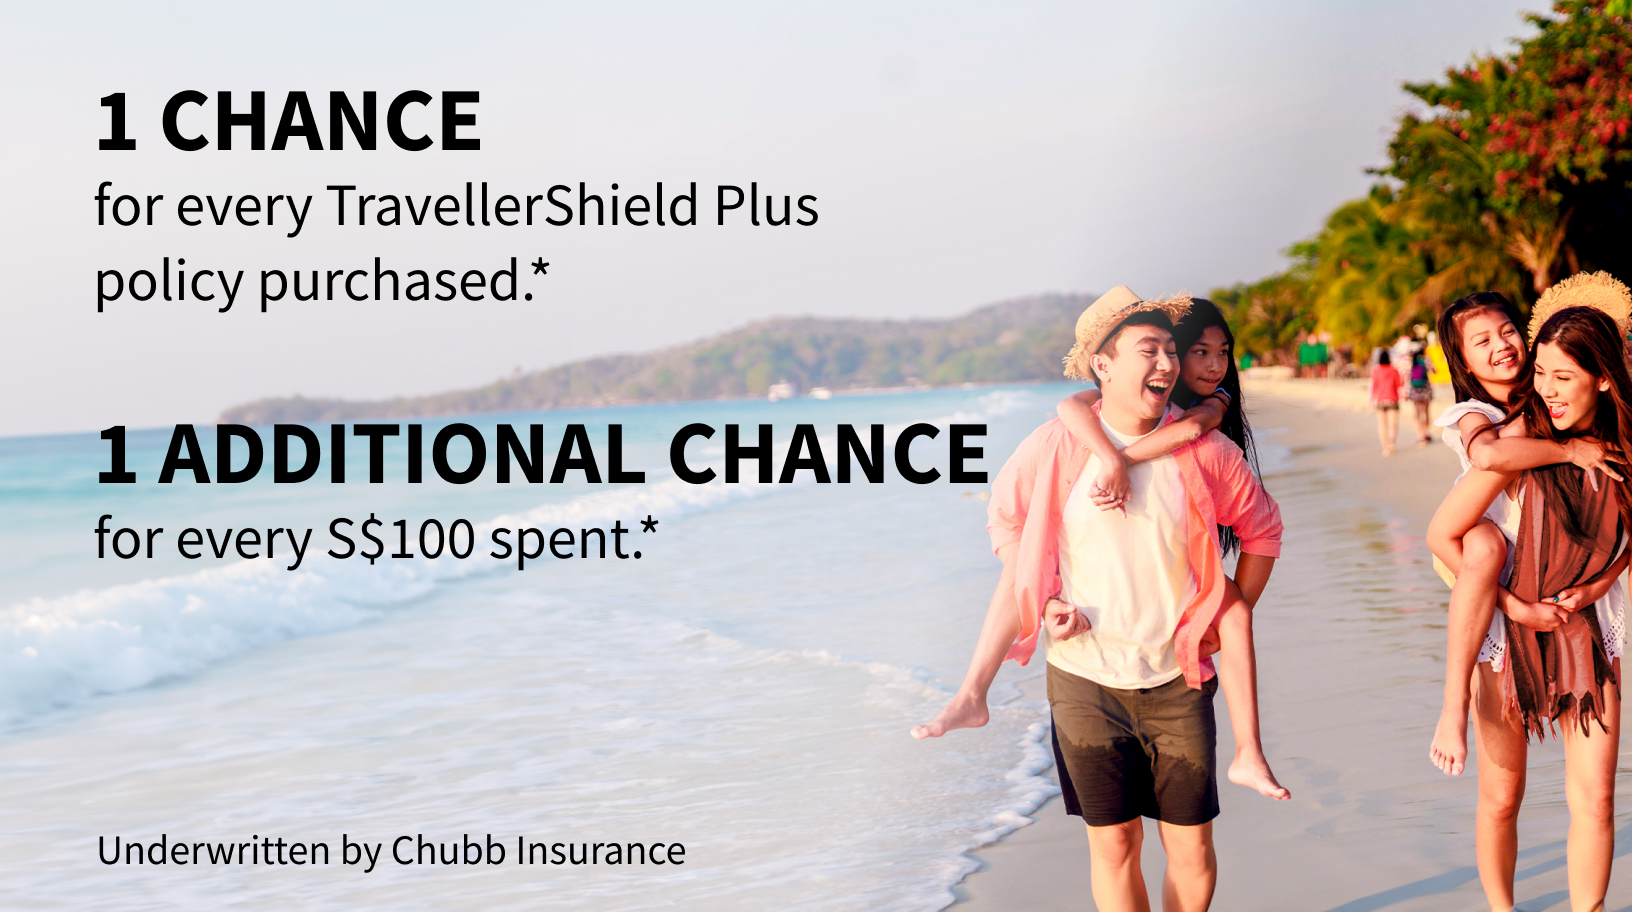 Up to 65% off premiums & 20% cashback when you buy TravellerShield Plus